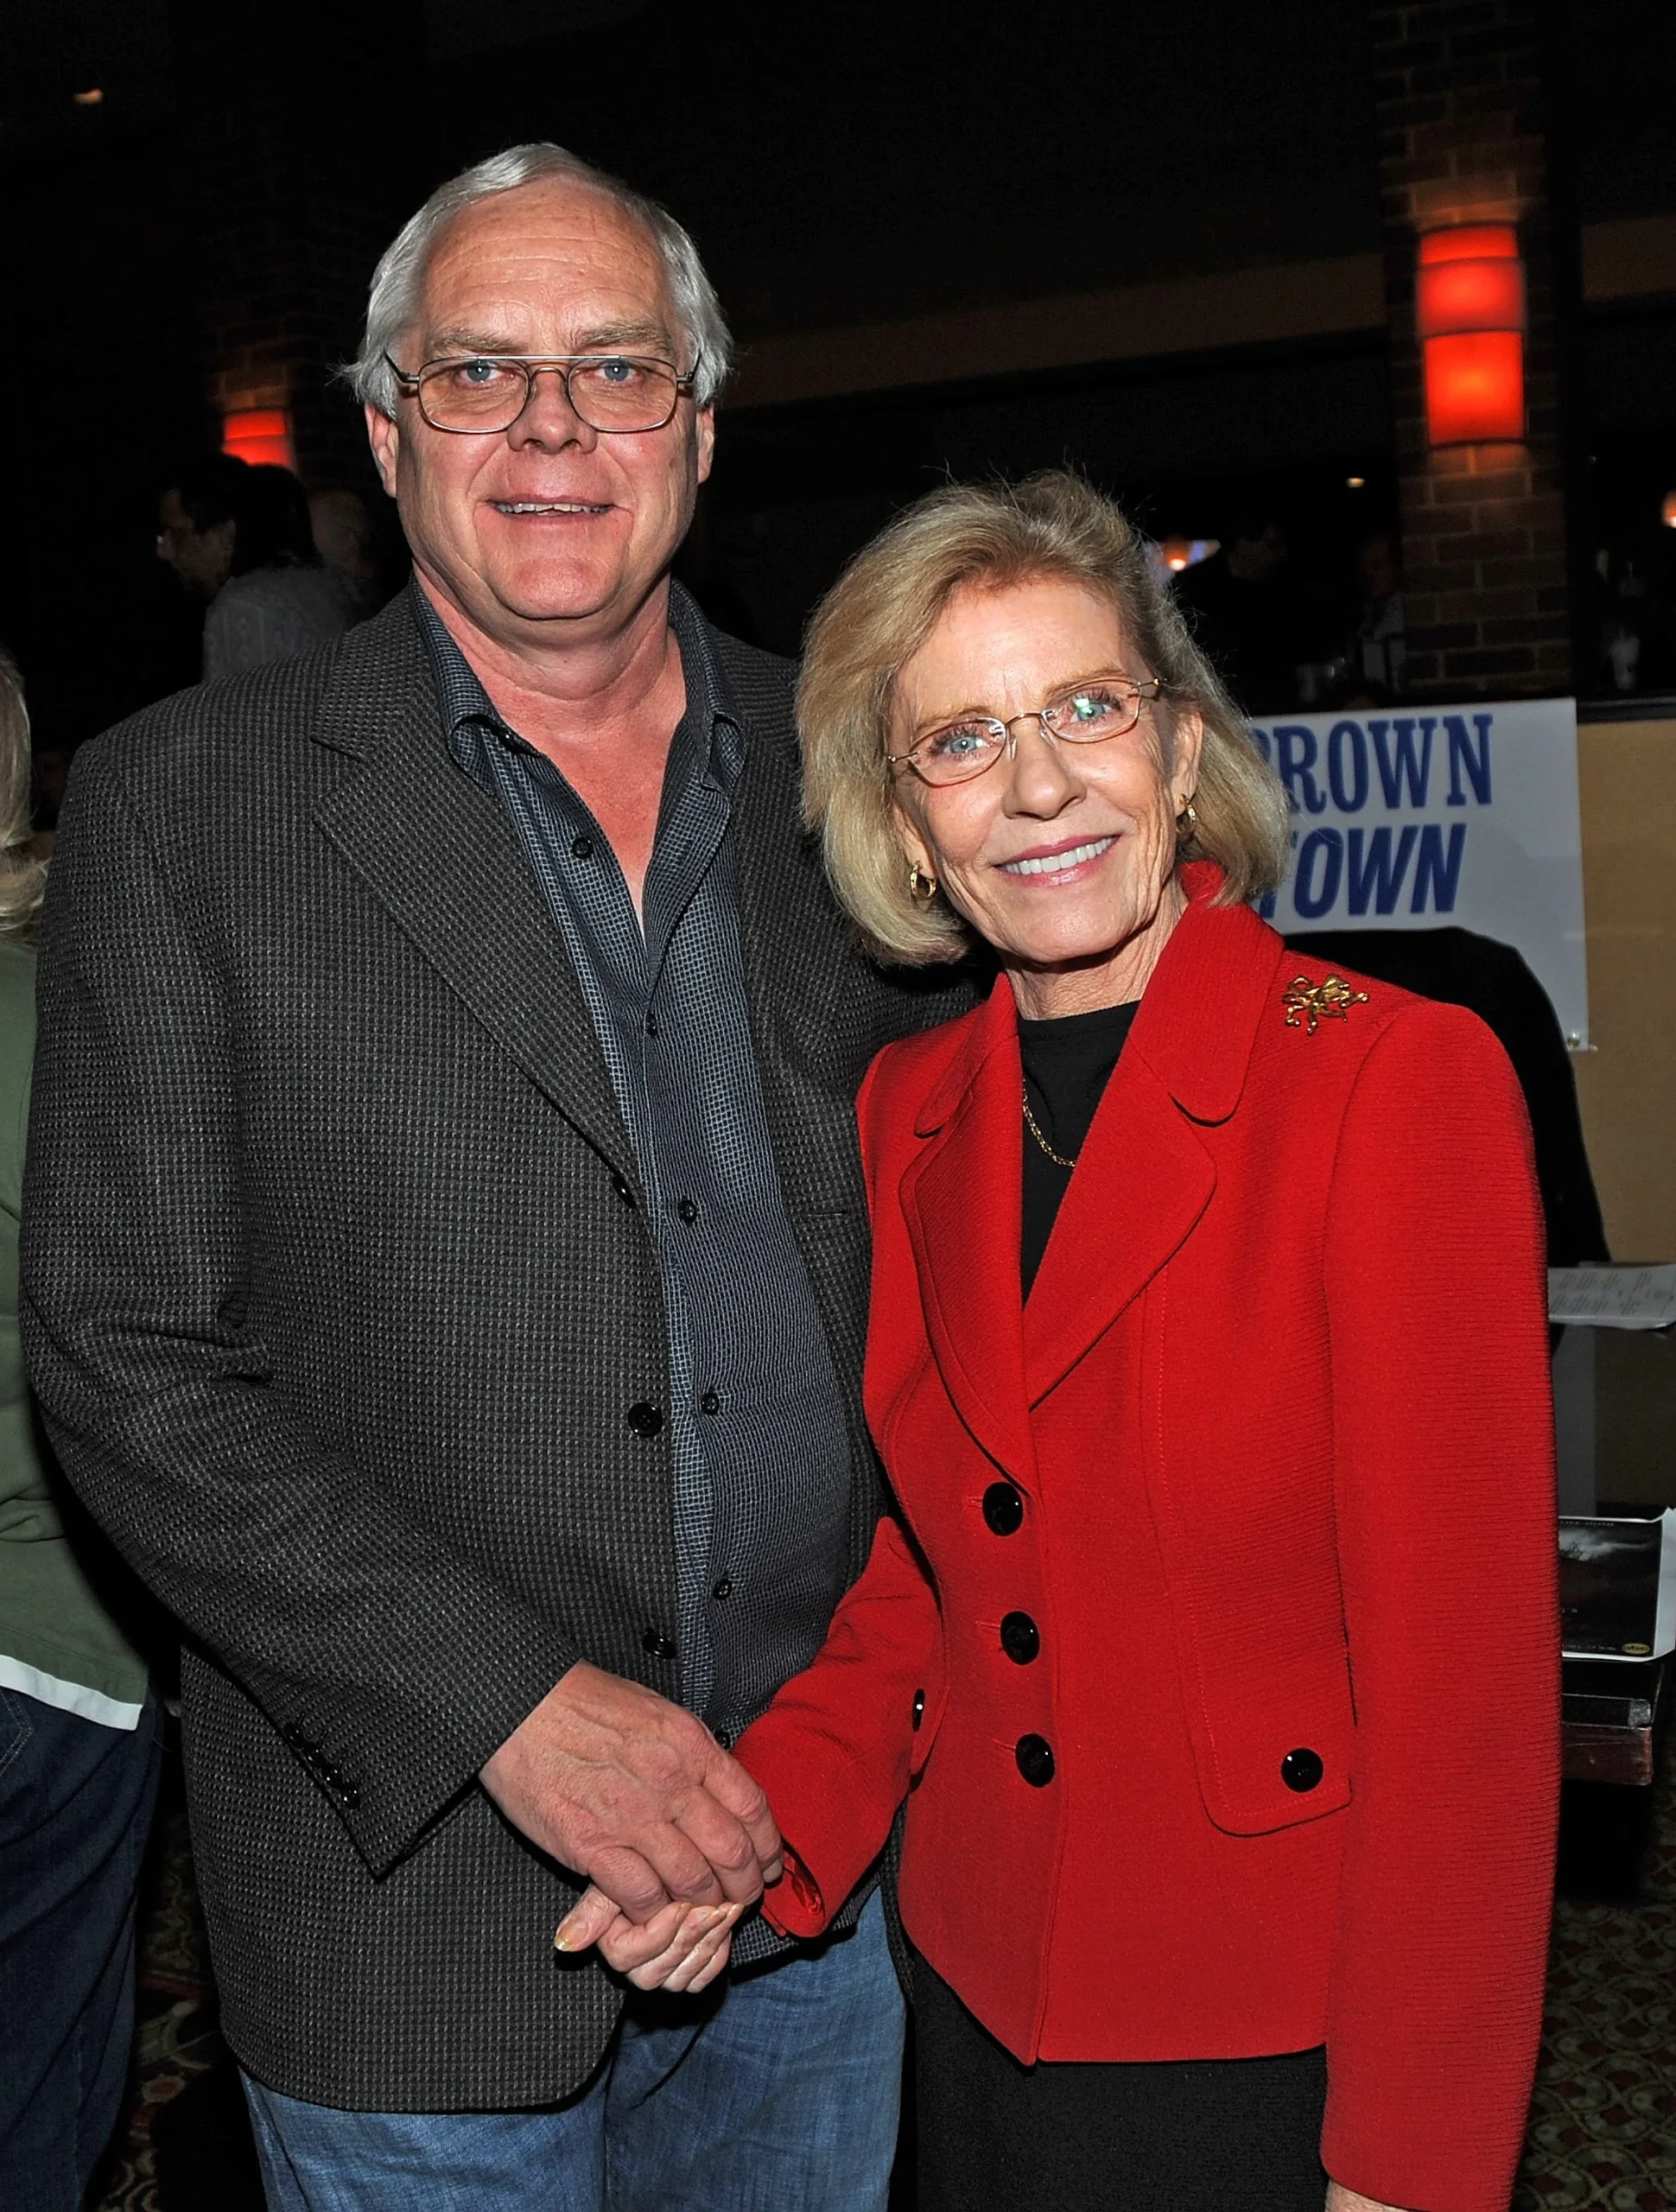 Where And Who Is Michael Tell, Late Patty Duke’s Husband?